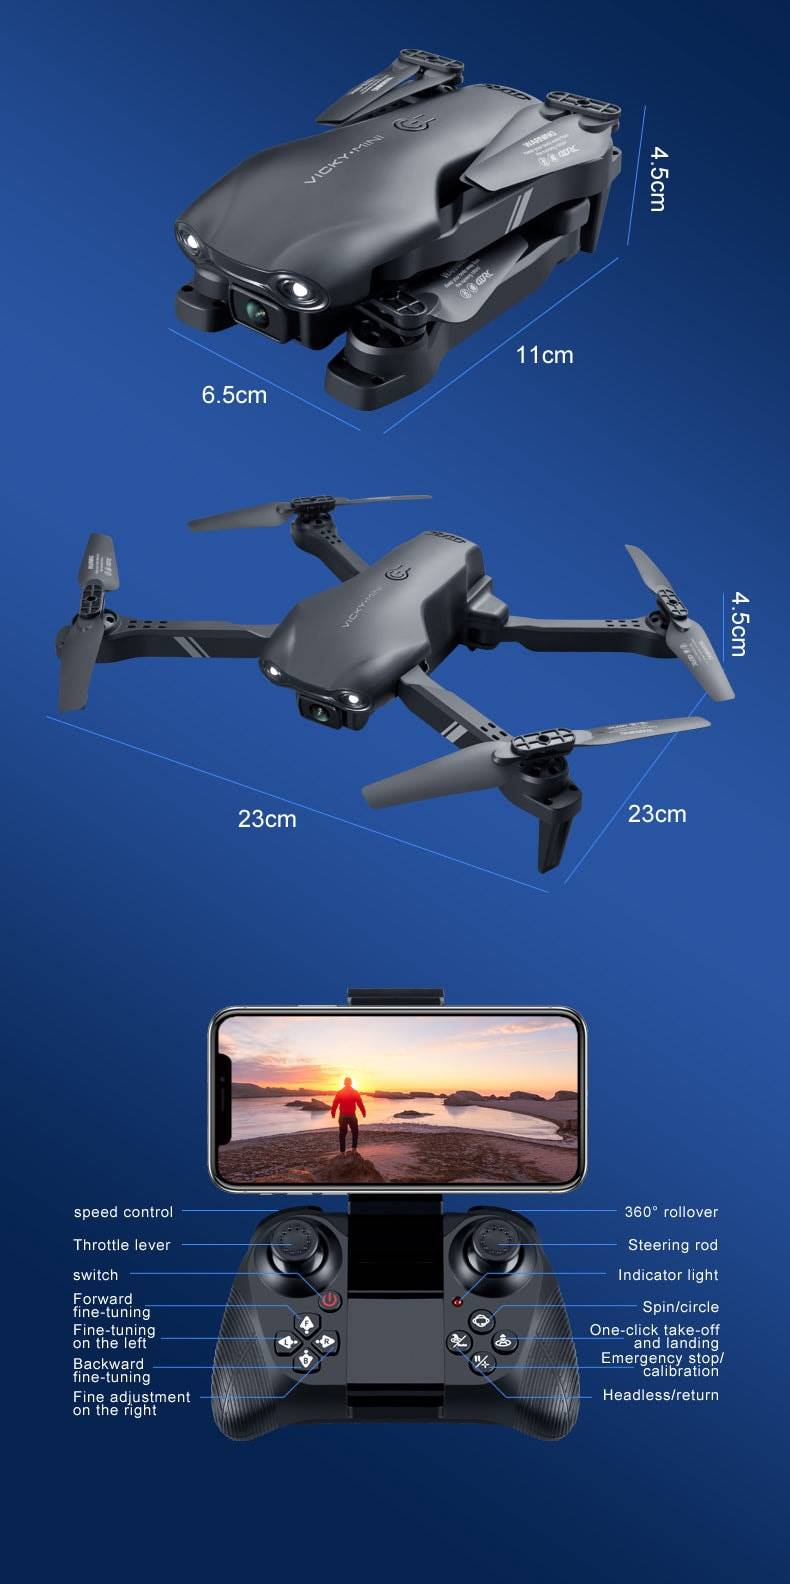 ALDO Creative Arts Collectibles Scale Model 25*20*5cm the arm is not folded/13*8*5cm (double arms folded / NEW / ABC Drone V13  Black 4K UHD,6K UHD Camera Wi-Fi FPV Dual Camera Foldable Quadcopter Real-time Transmission Aircraft